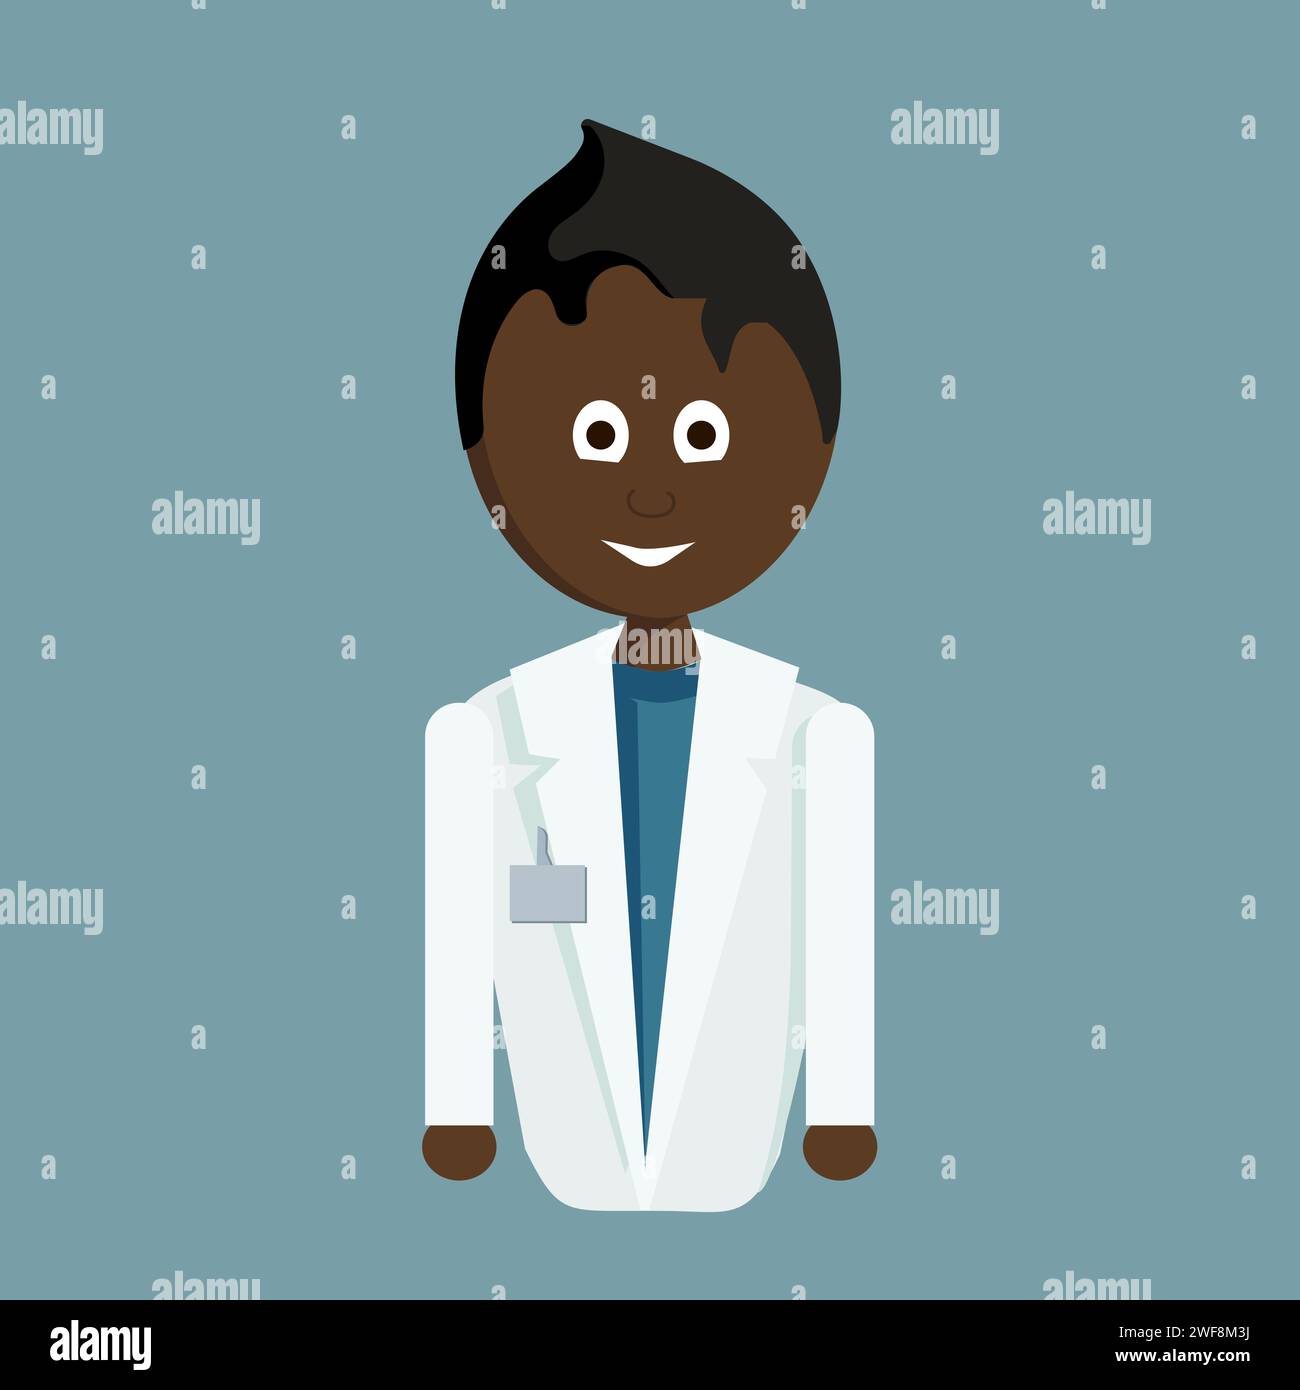 A male African American doctor with dark hair and large eyes, wearing a nametag on a white coat and a blue t-shirt. The figure is waist-length. Vector Stock Vector